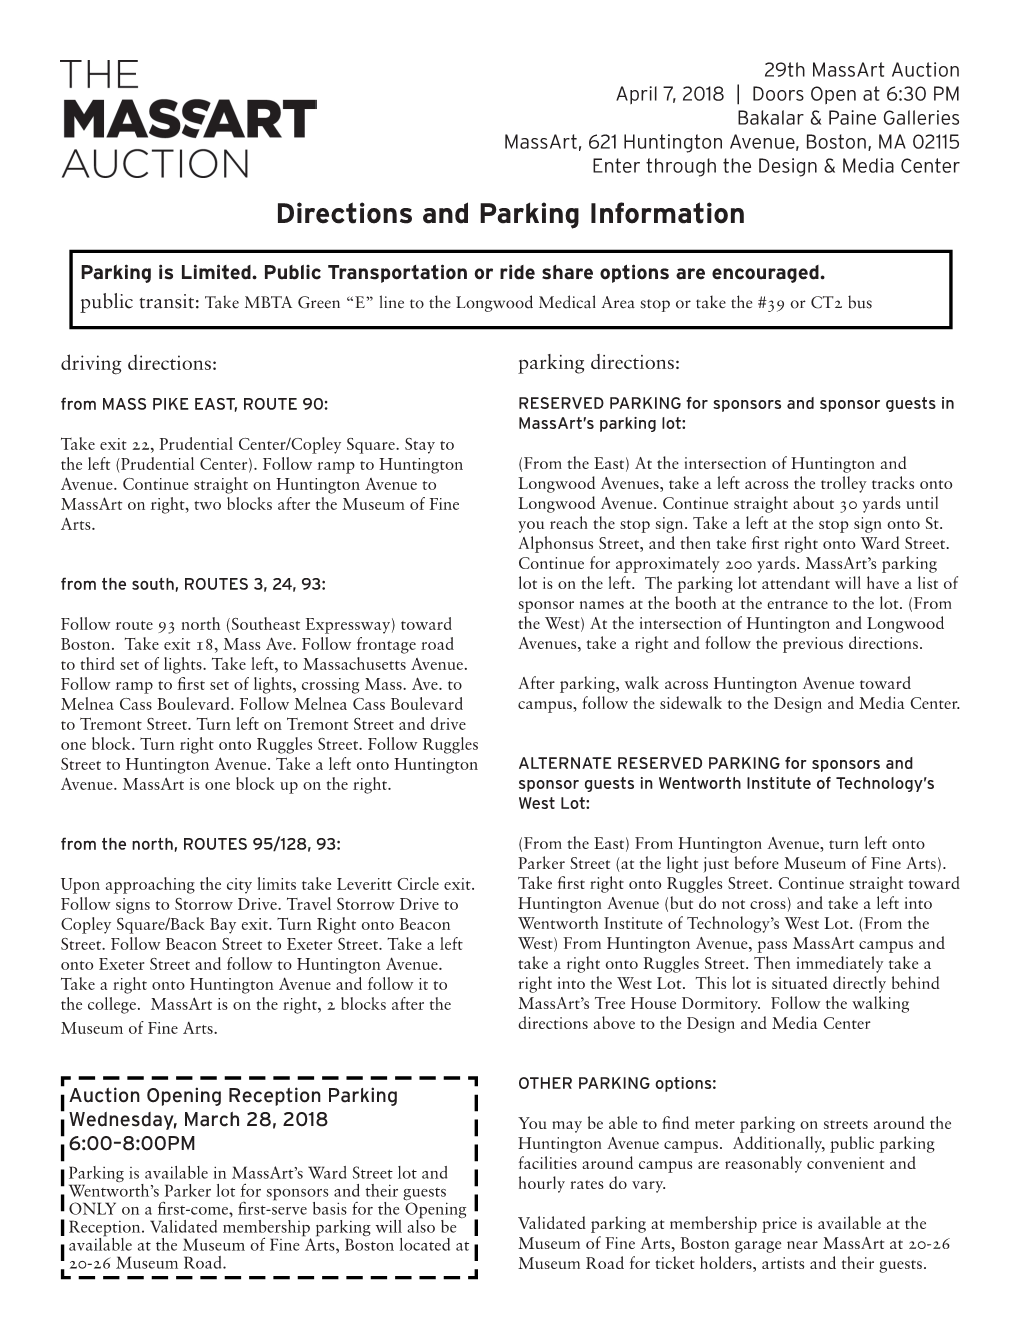 Directions and Parking Information